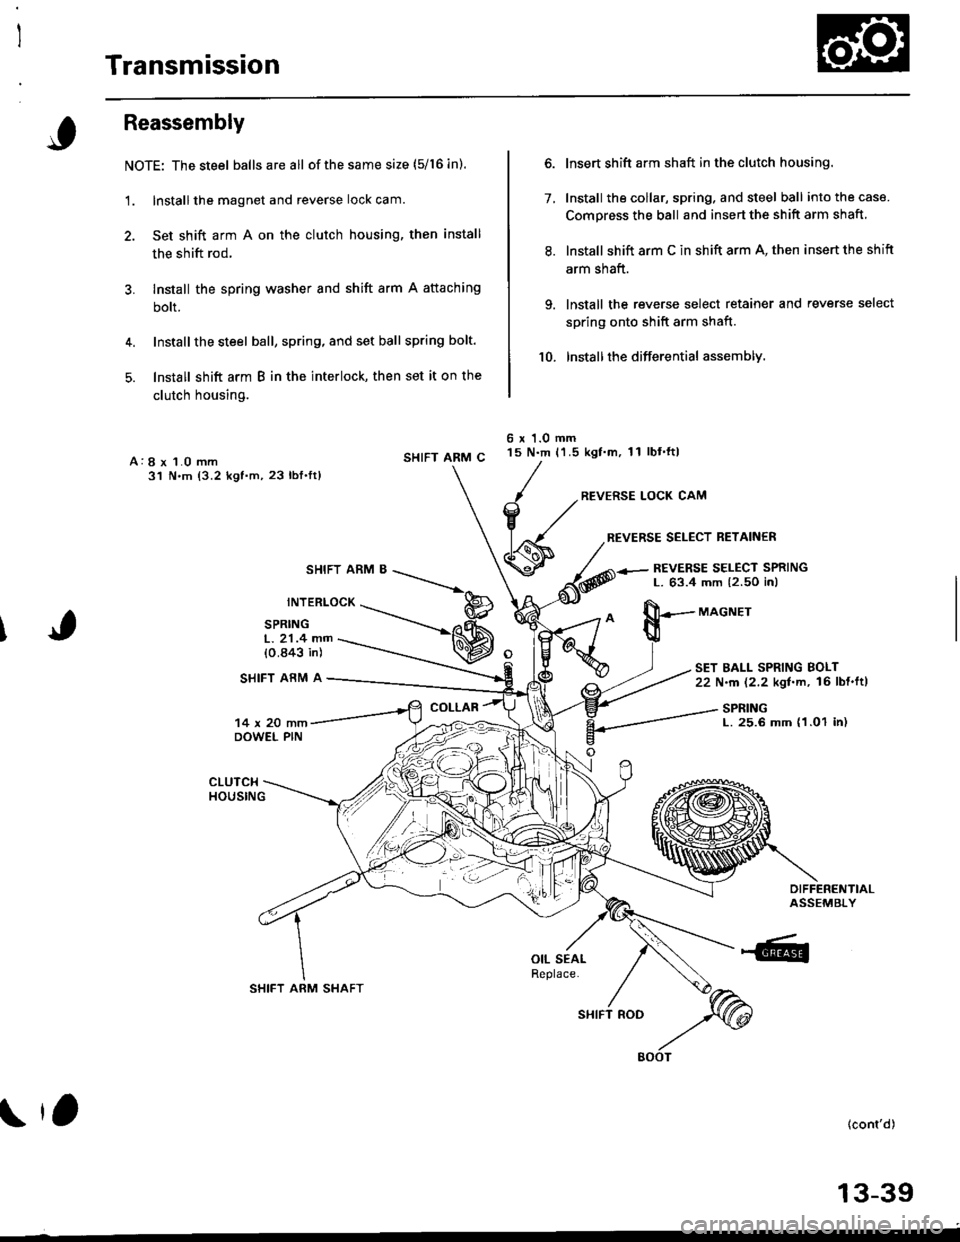 HONDA CIVIC 1998 6.G Workshop Manual Transmission
Reassembly
NOTE: The steel balls are all ofthe same size (5/16 in).
1. Install the magnet and reverse lock cam.
2. Set shift arm A on the clutch housing, then install
the shift rod.
3. In